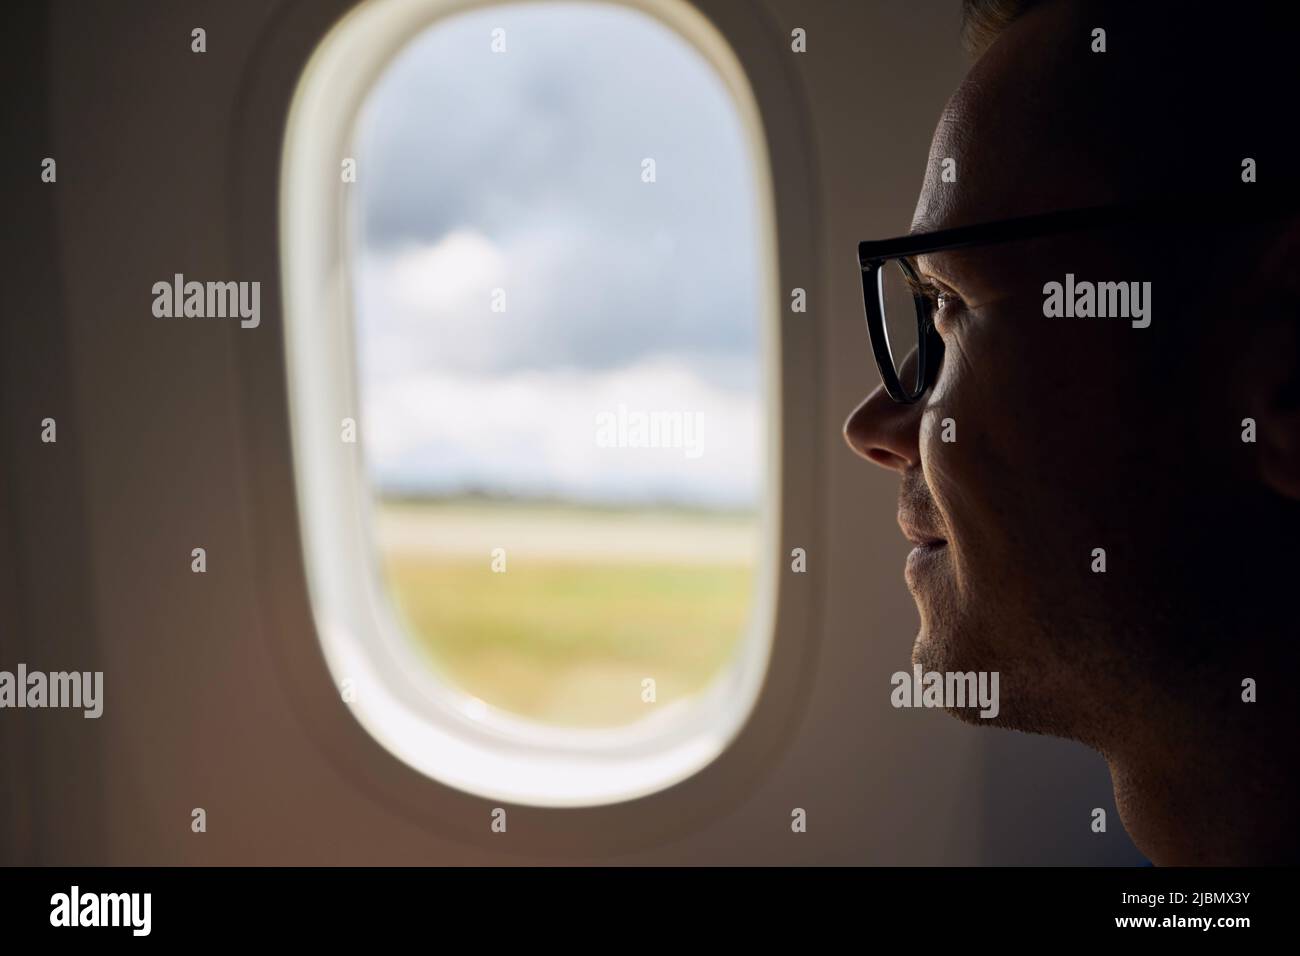 Portrait of man traveling by airplane. Passenger looking through plane window during taxiing at airport. Stock Photo